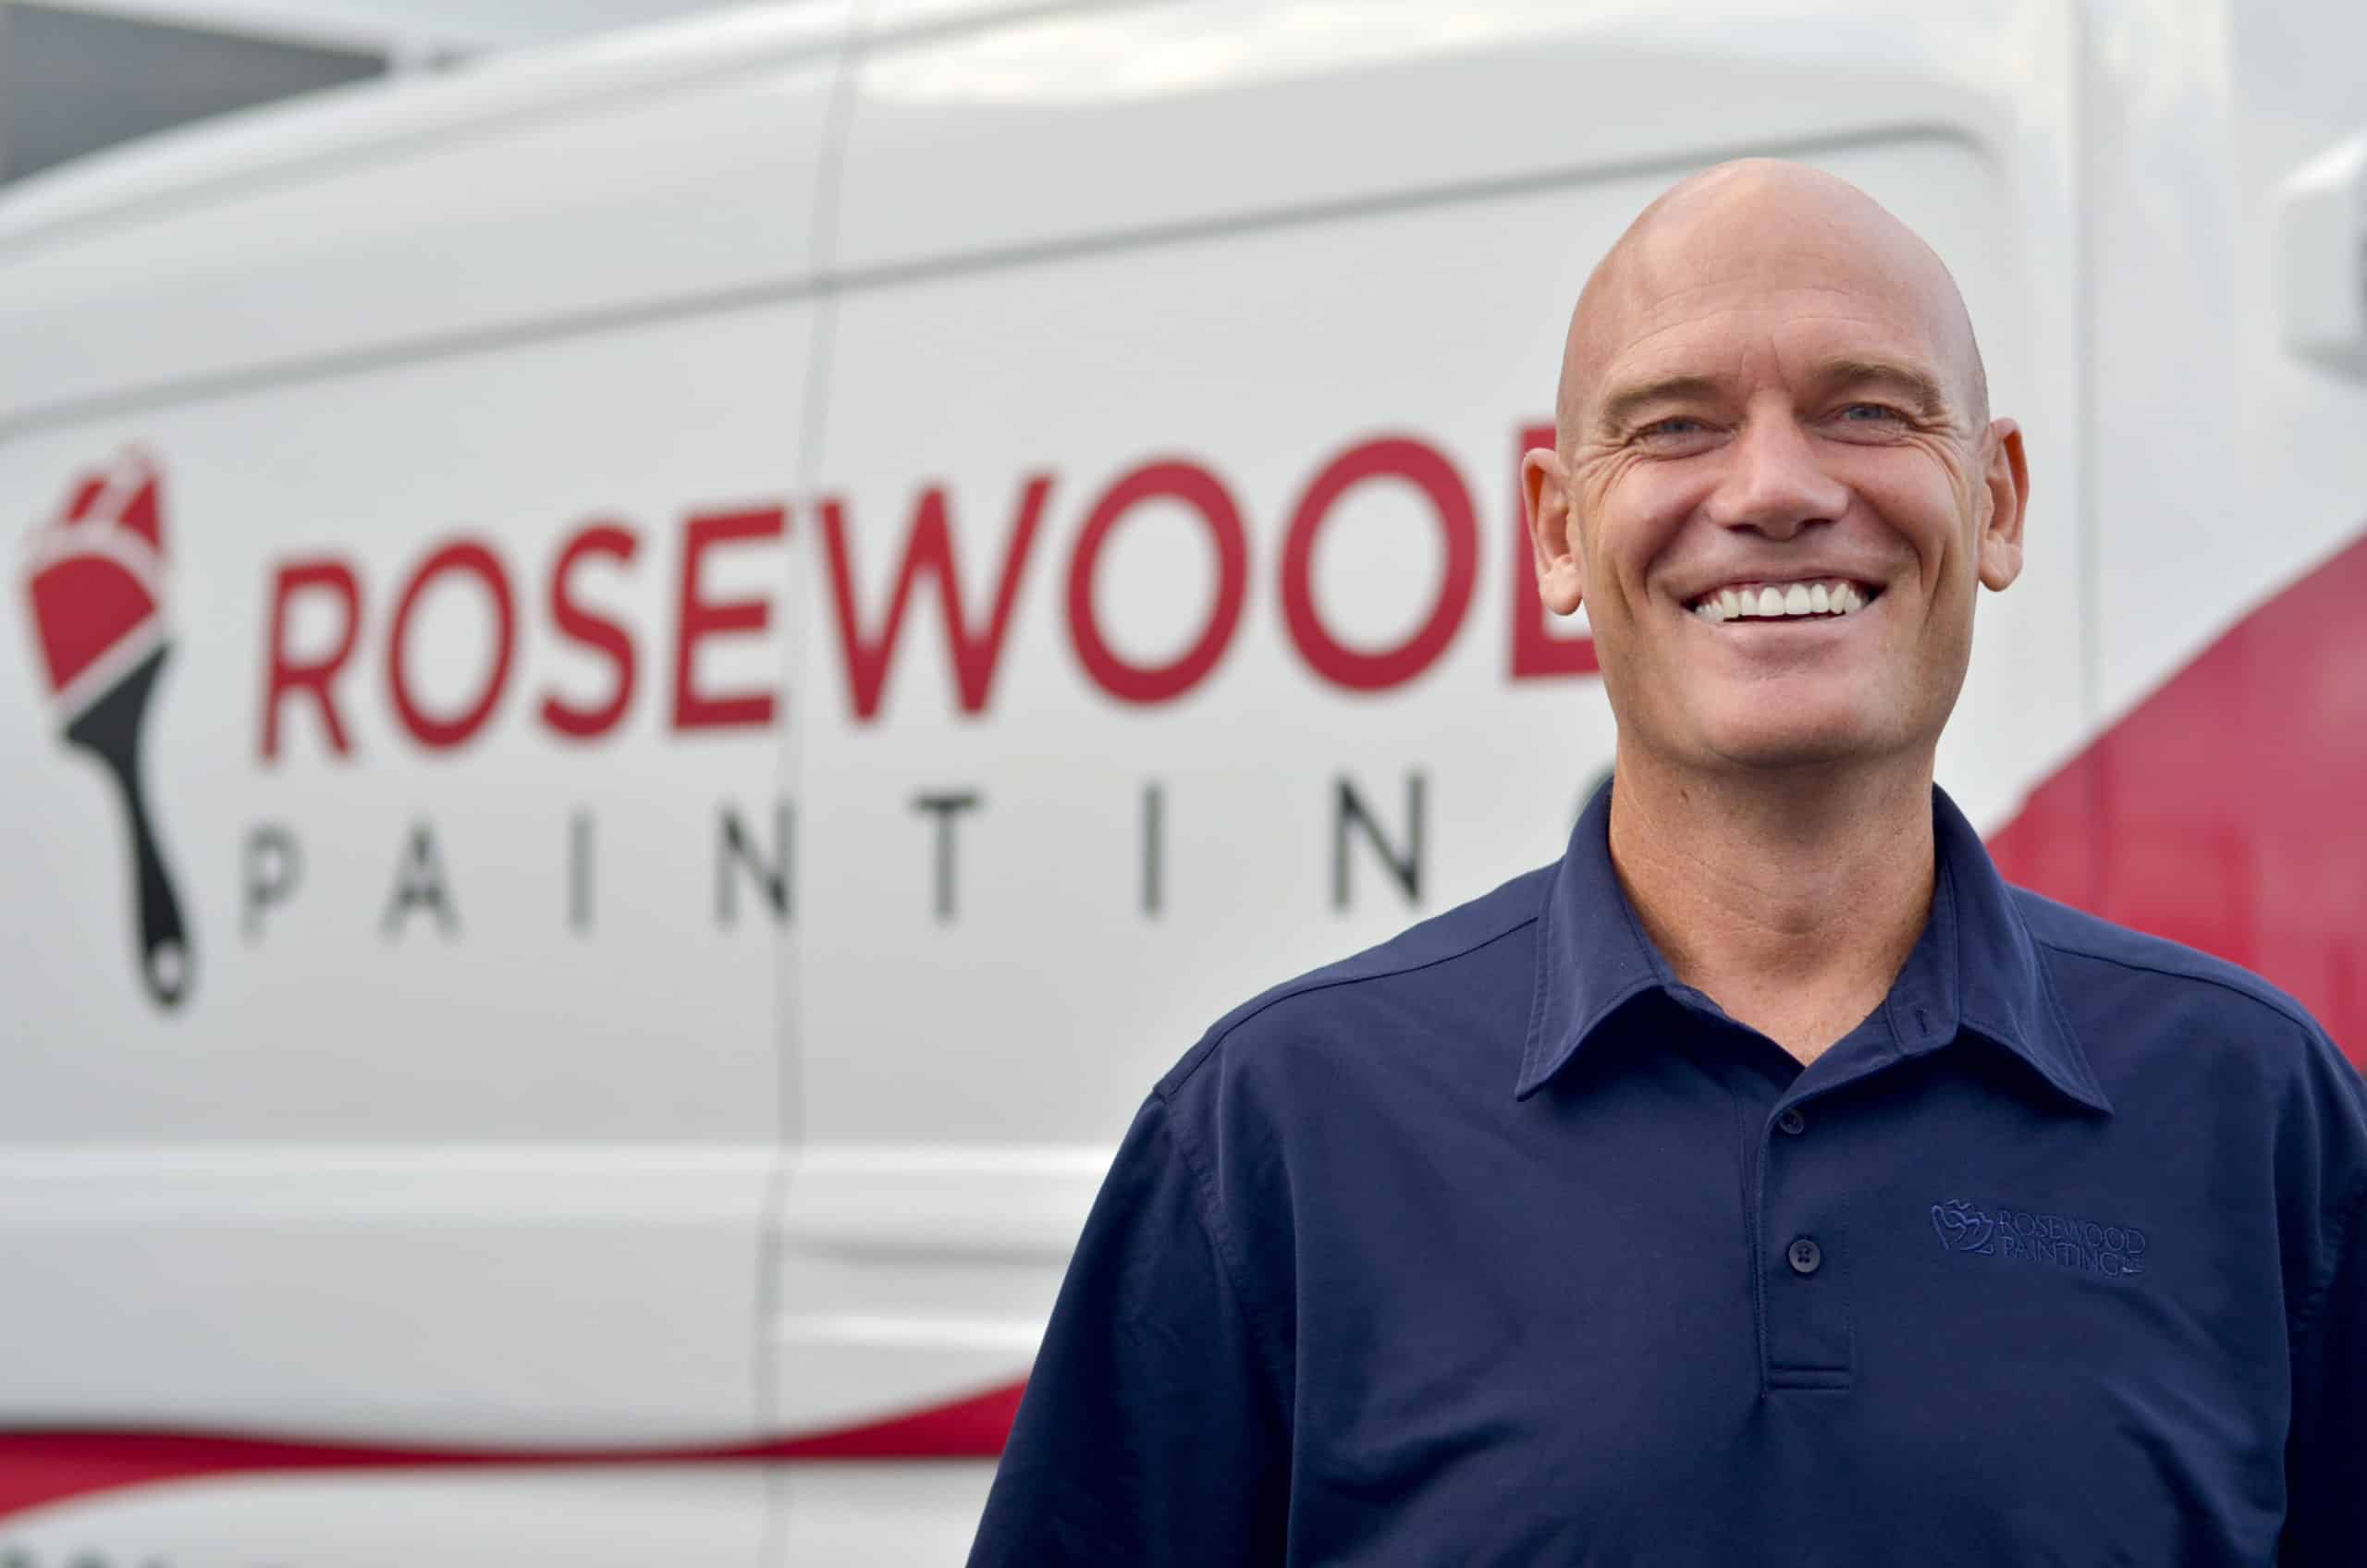 Rosewood Painting Layton, UT Painting Services